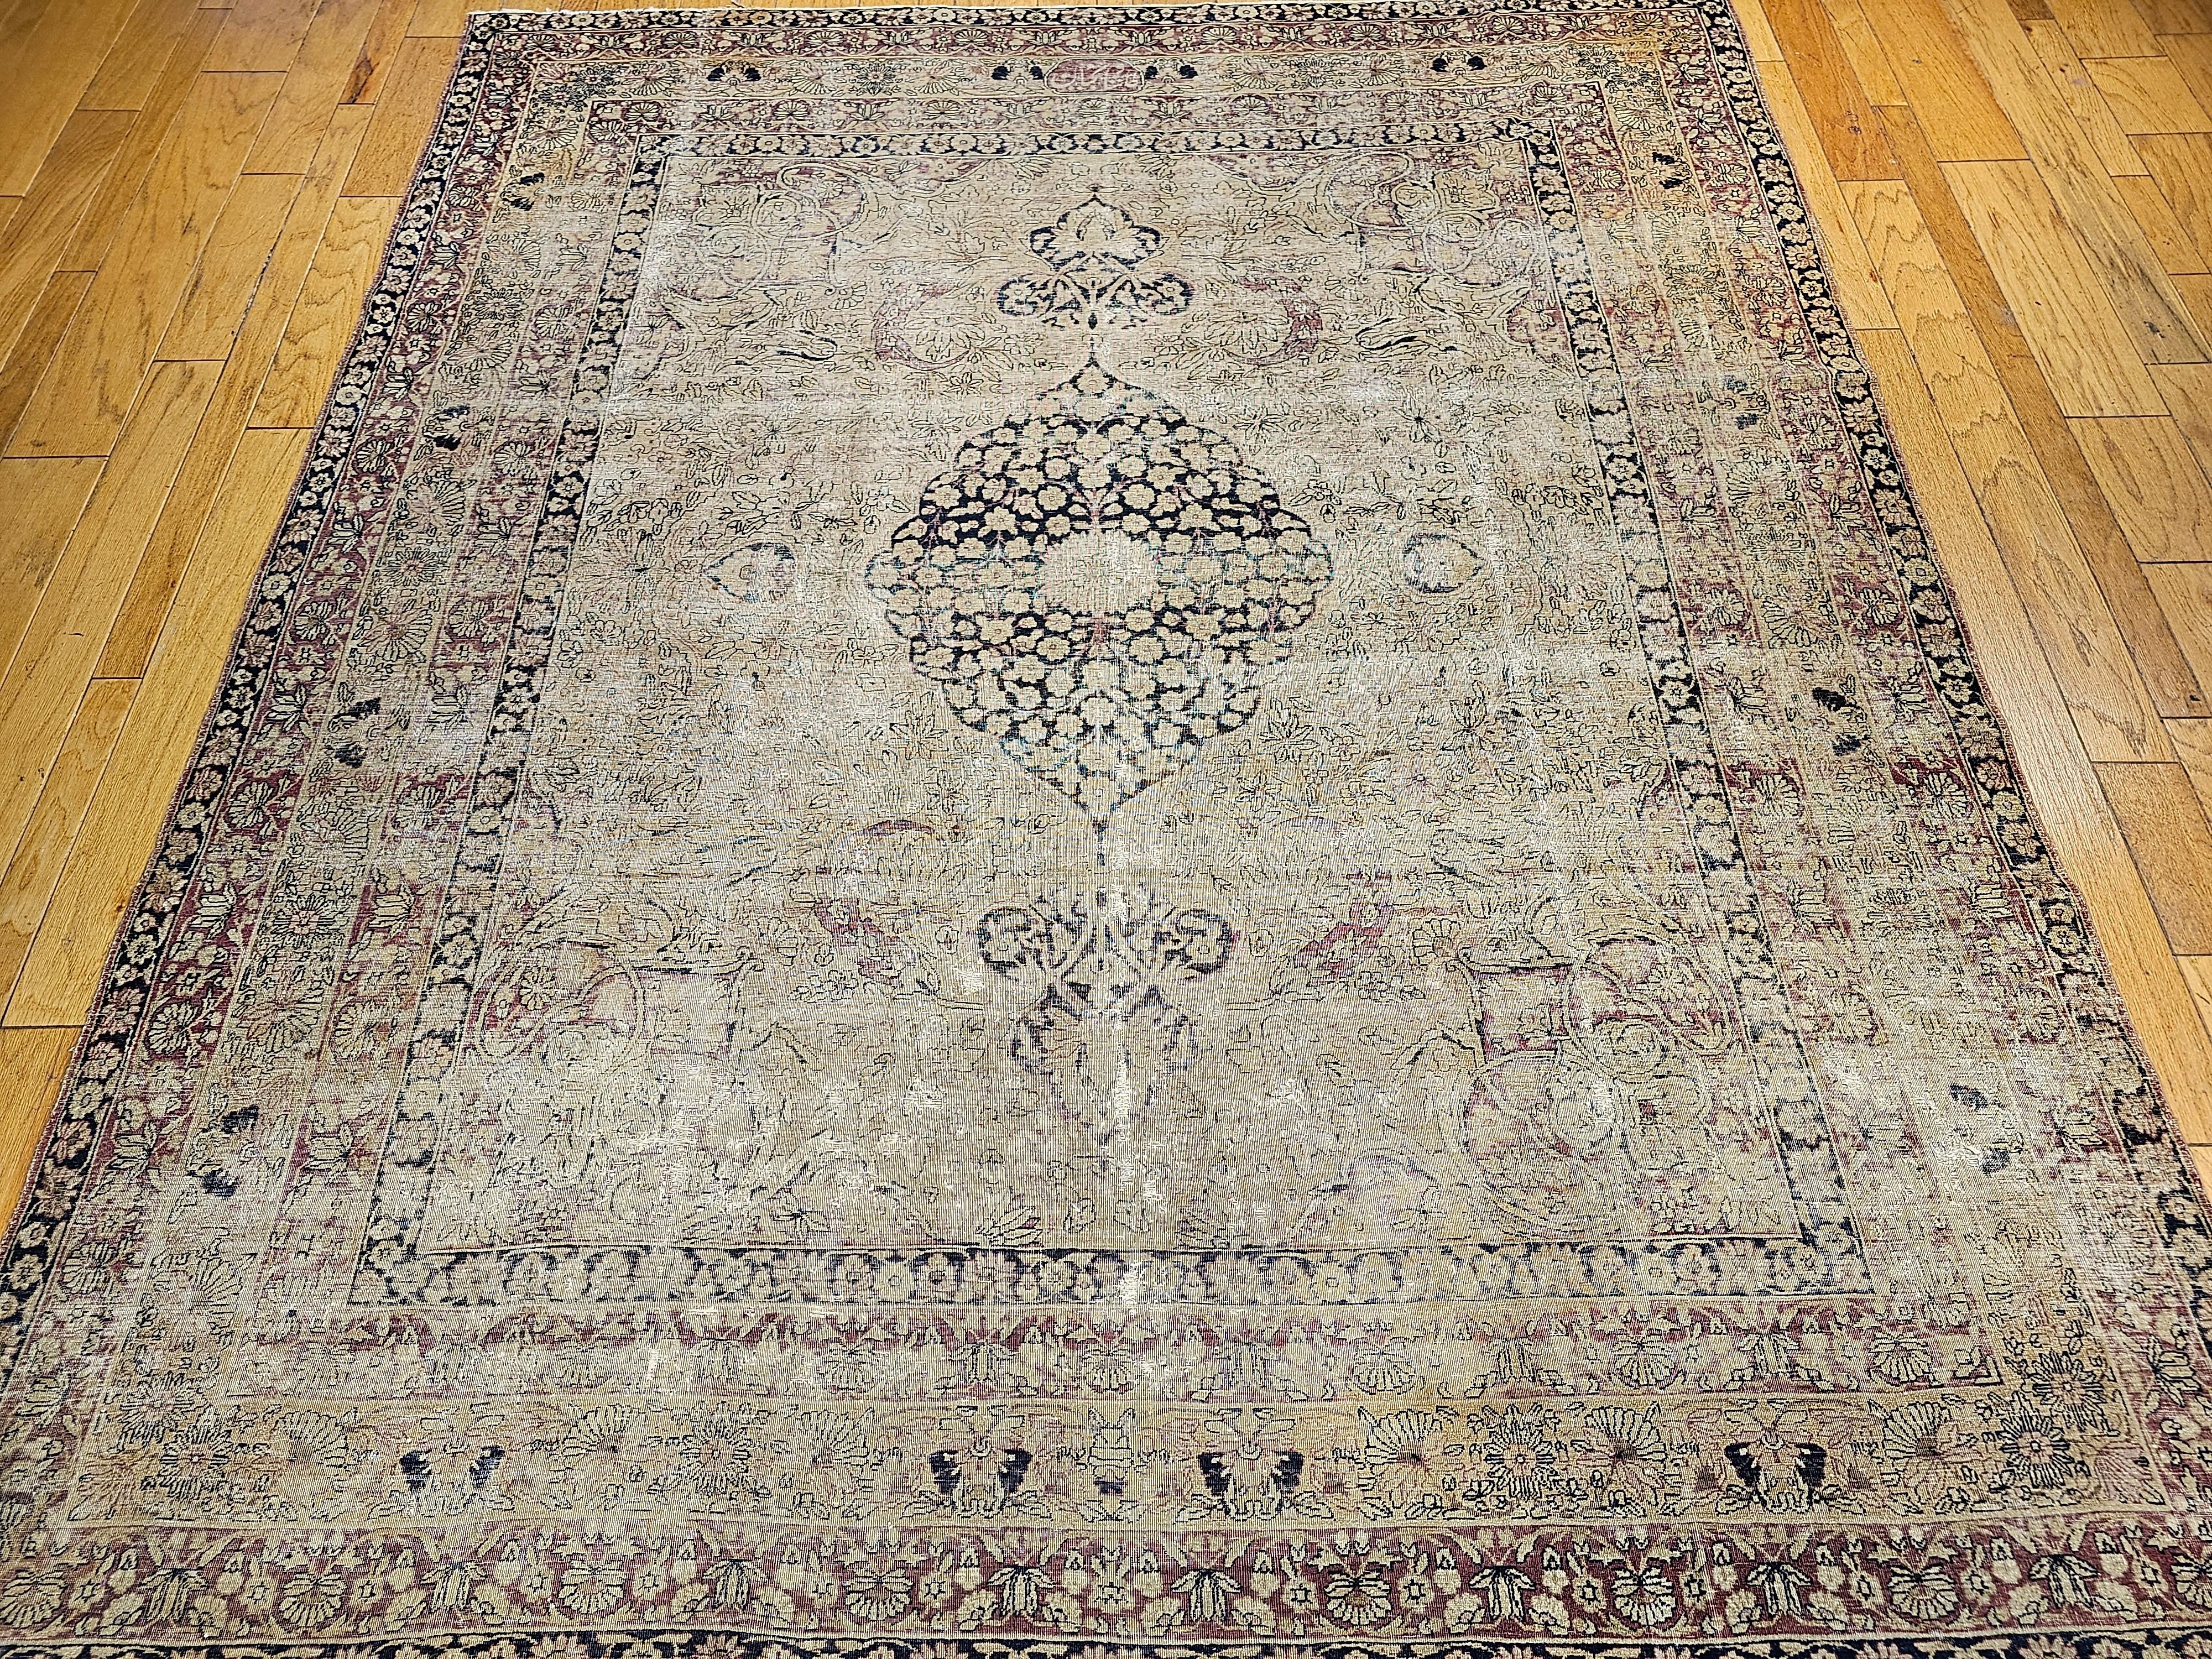 A rare near square size Persian Kermanshah circa the 3rd quarter of the 1800s.  The beautiful Persian Kermanshah has a “distressed’ look and a medallion floral pattern set in an ivory color background.  The design throughout the field and border is